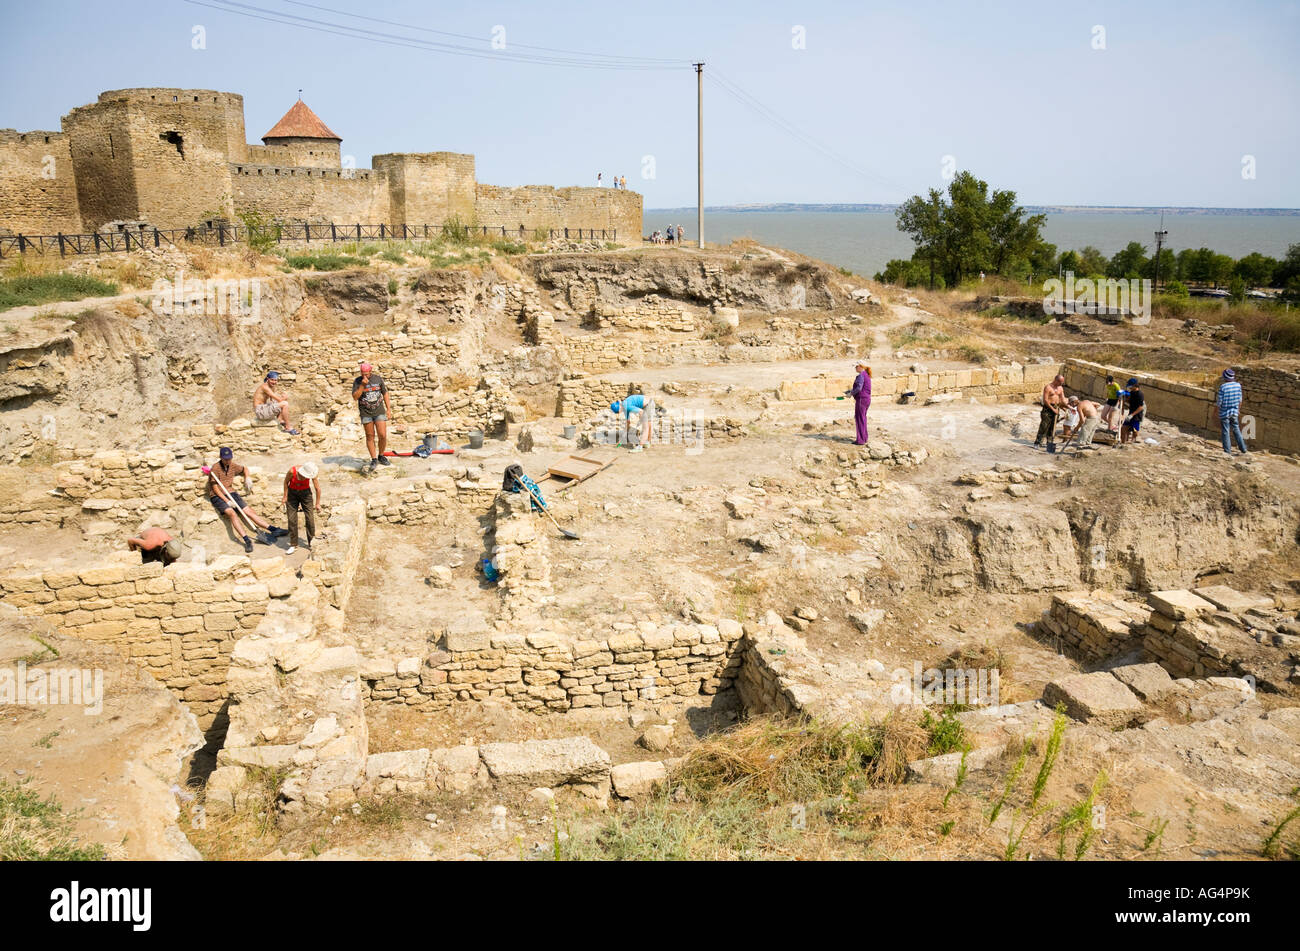 Archaeology students working at an excavation site of the ancient greek settlement of Tyras in nowadays Ukraine Stock Photo